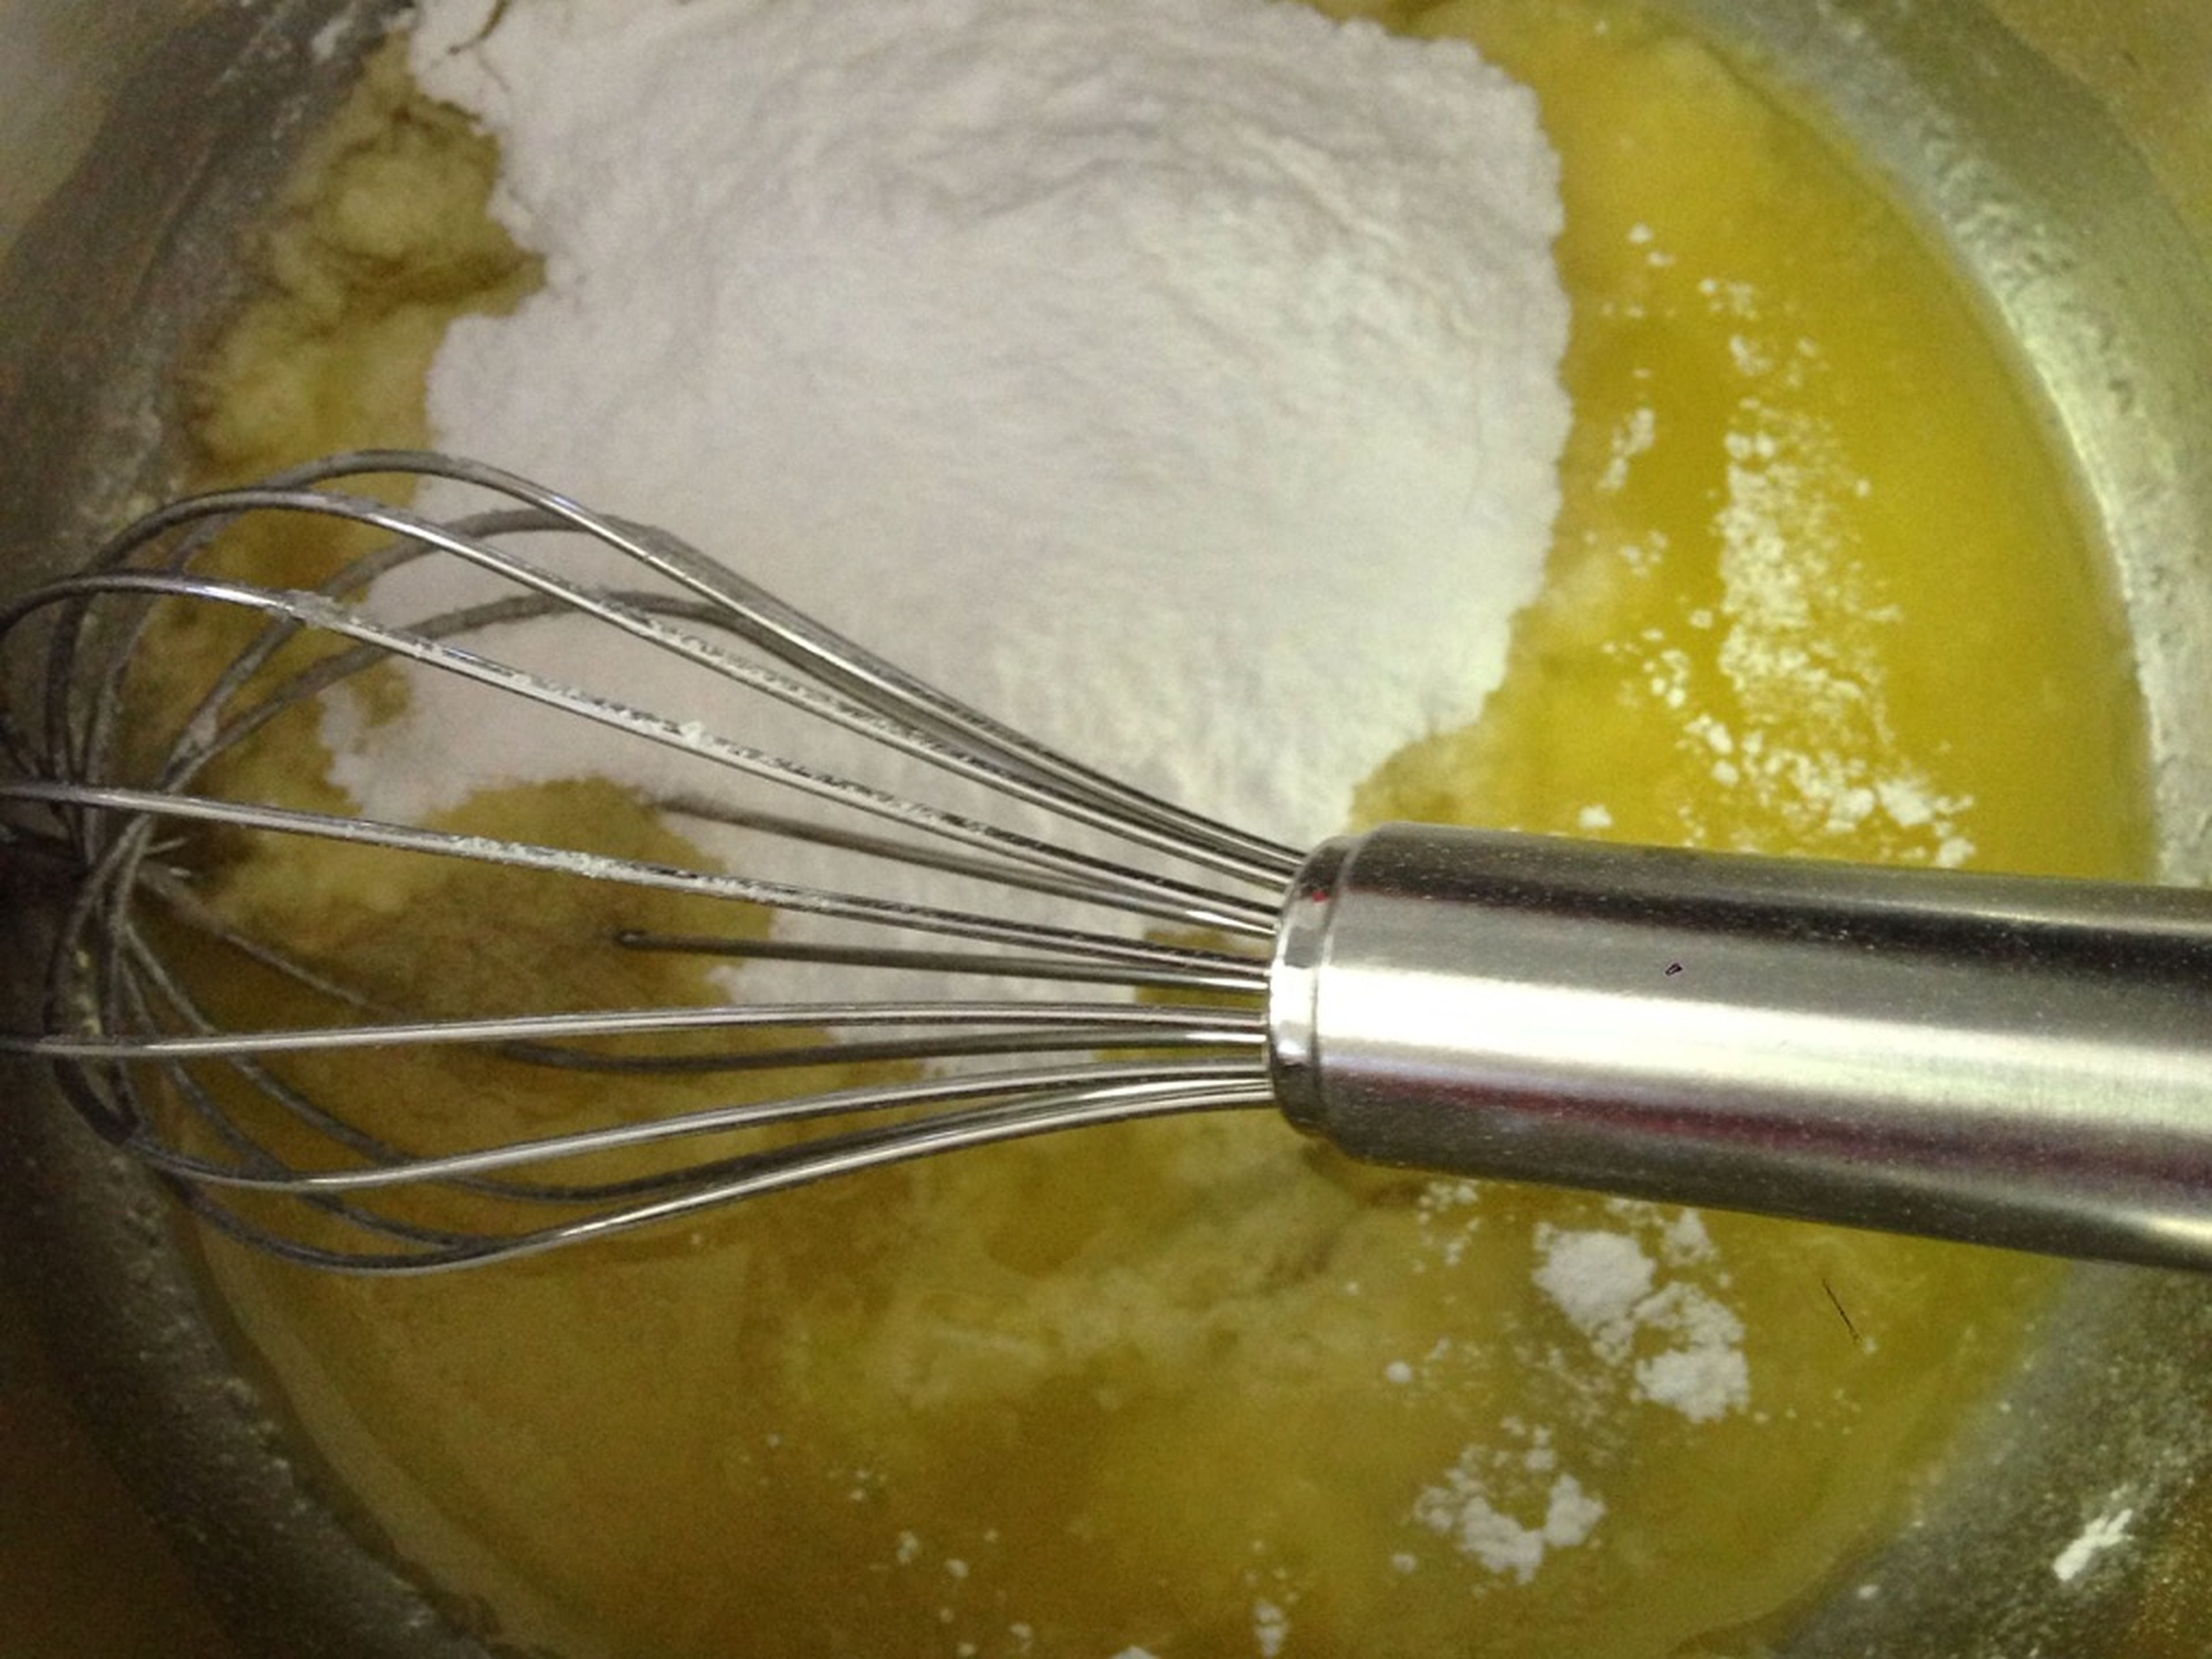 Melt the butter in a frying pan and add to a bowl with the confectioner’s sugar, vanilla sugar, and vanilla bean seeds. Whisk to combine.